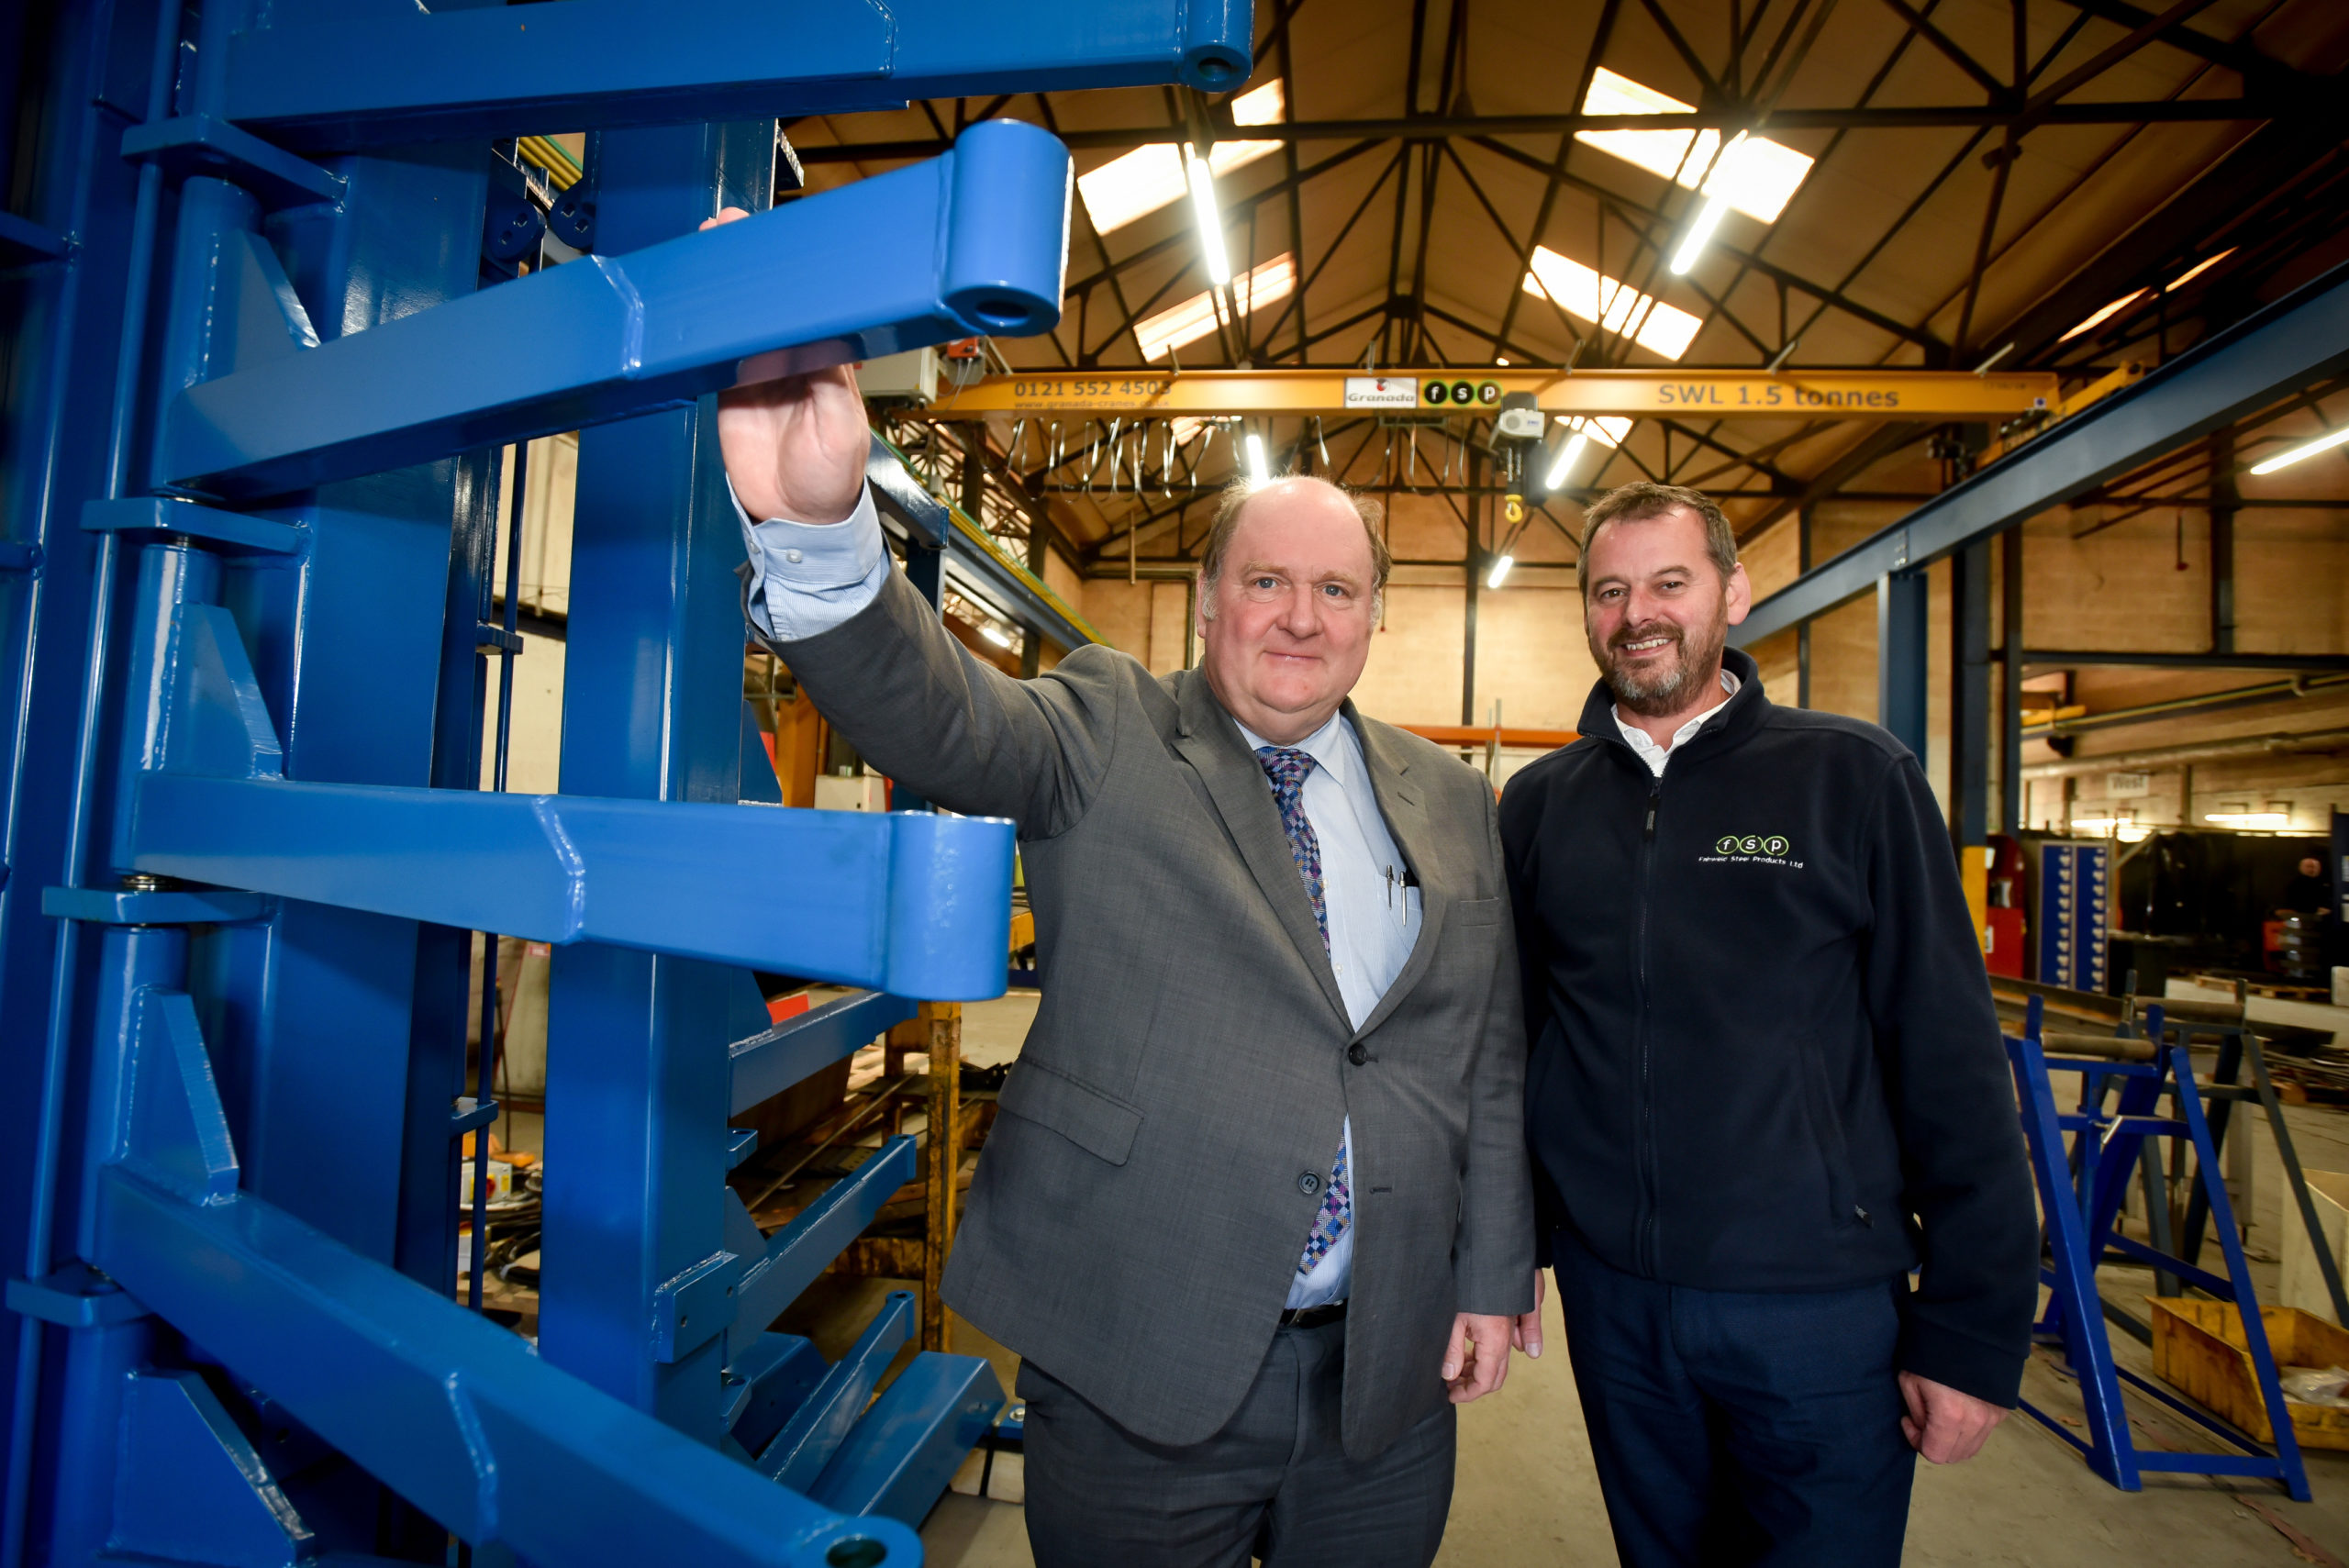 Grant funding supports steel manufacturer’s growth